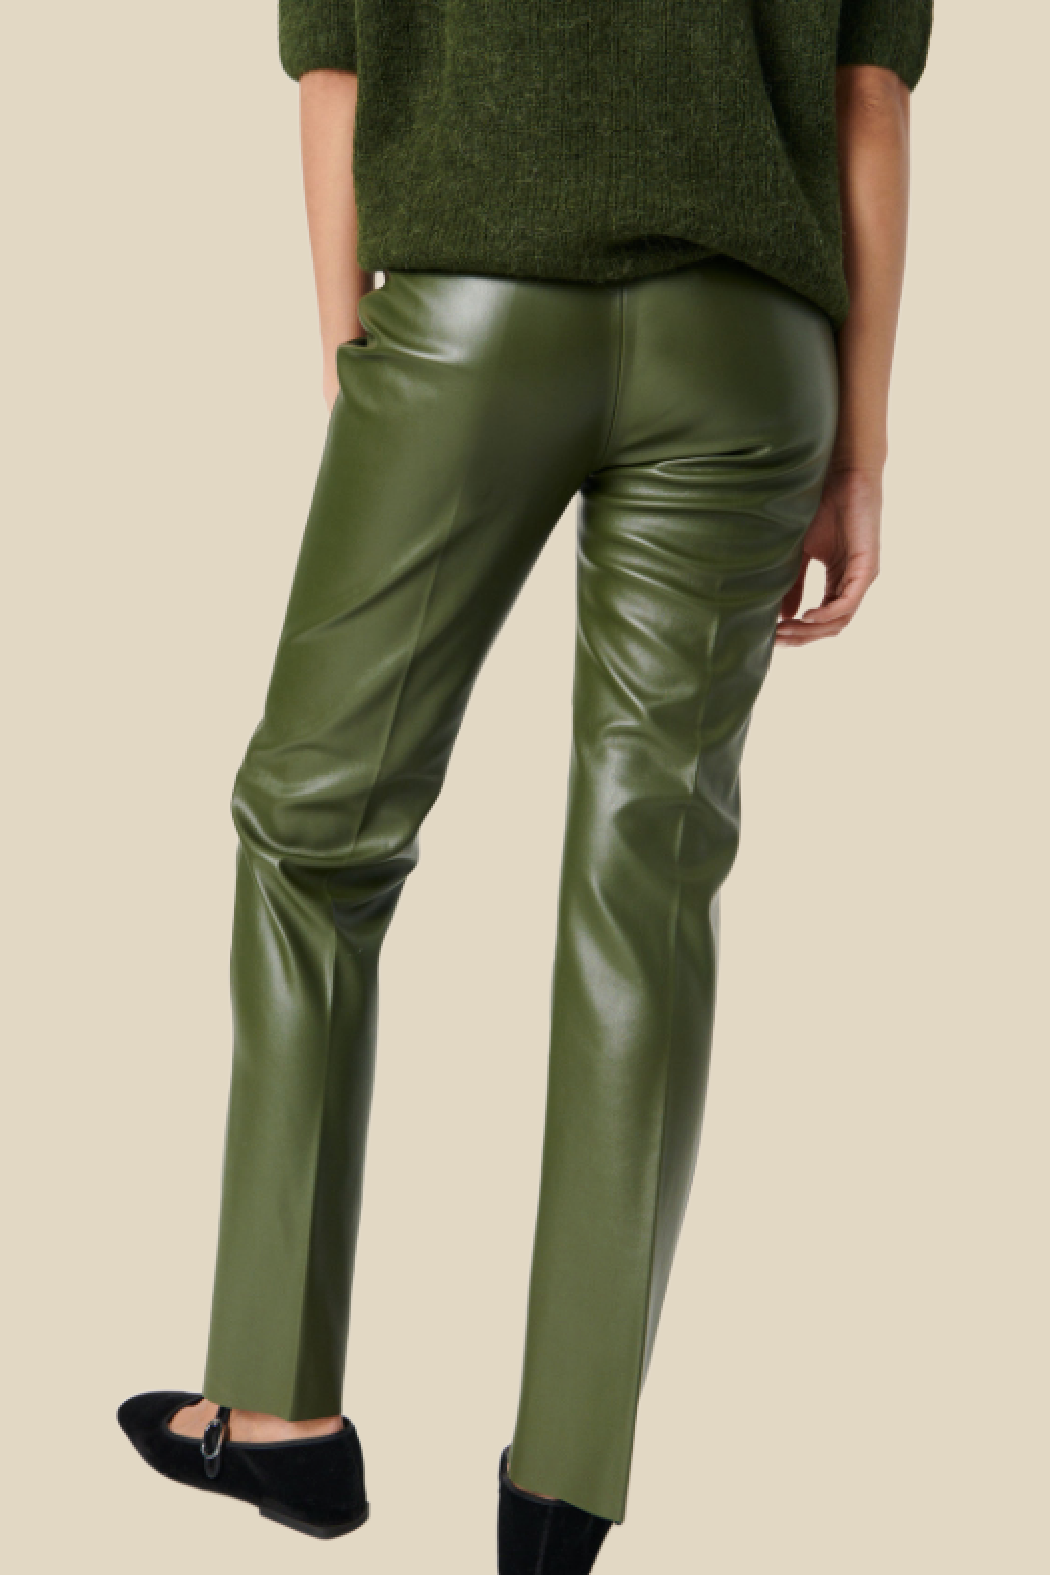 Kaylee Straight Faux Leather Pants – The Old Mill